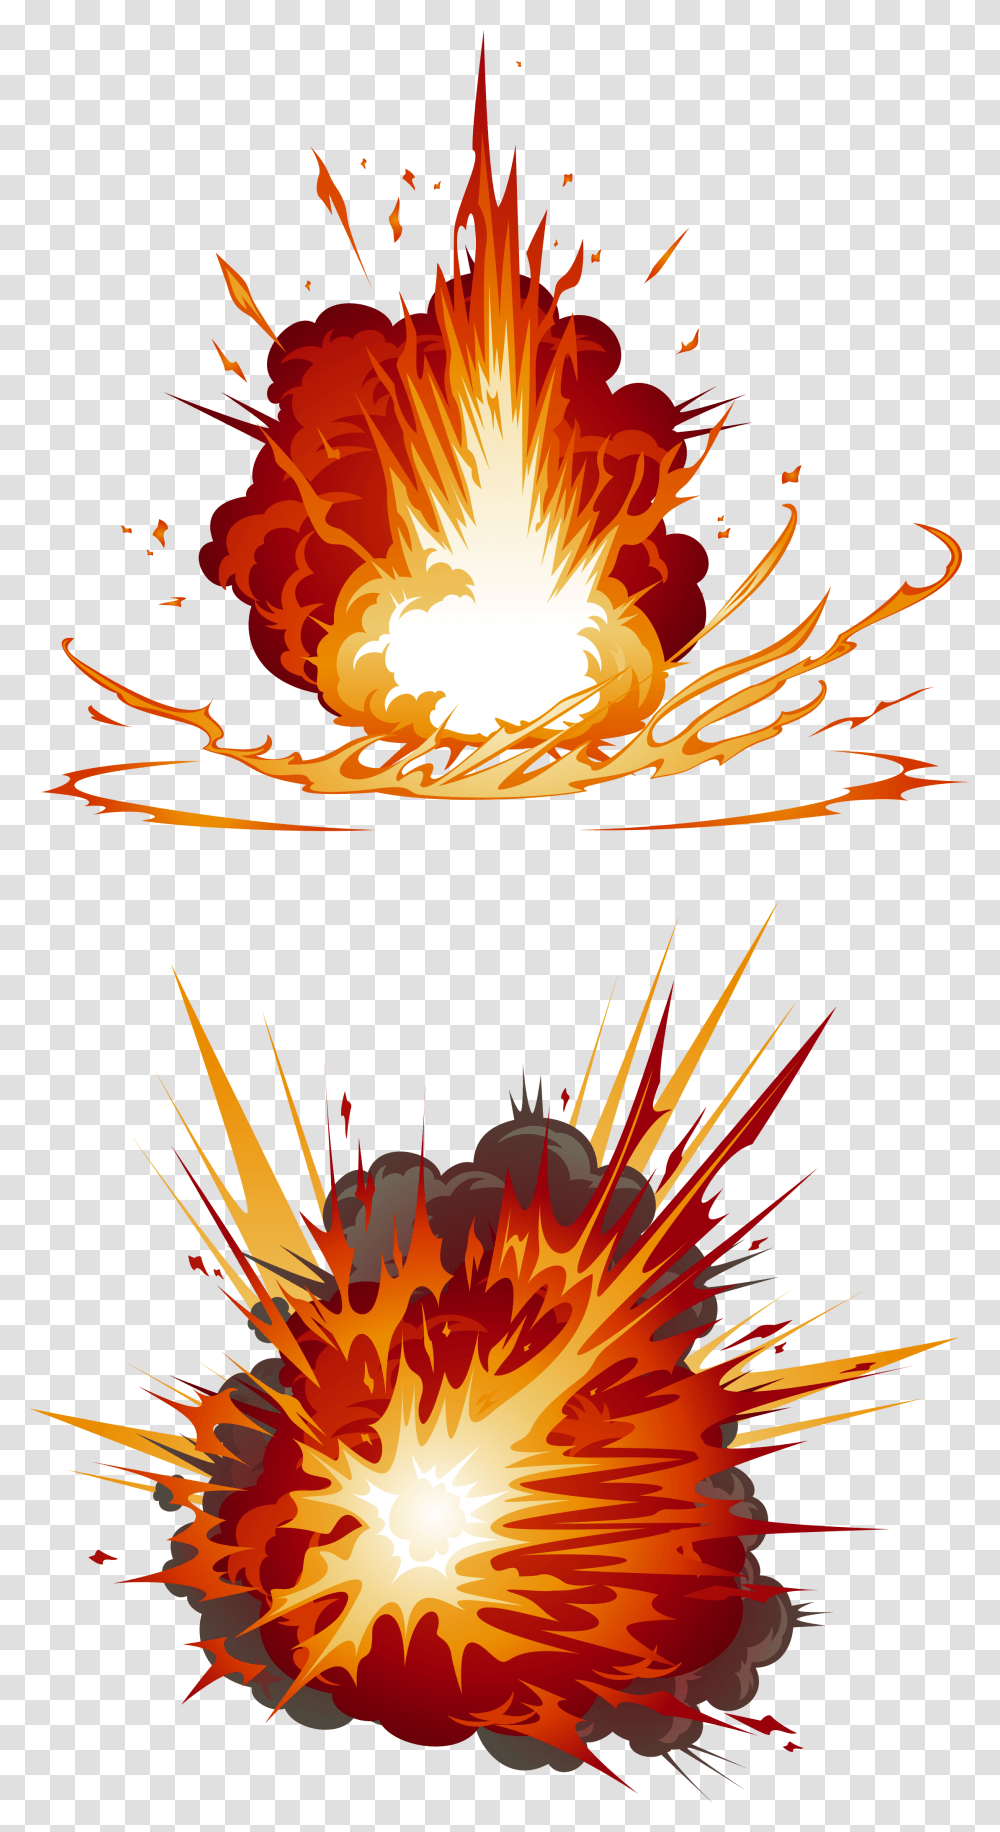 Download My Explosion Firecracker Explosions Explosion Explosion Cartoon, Flame, Flare, Light, Nature Transparent Png